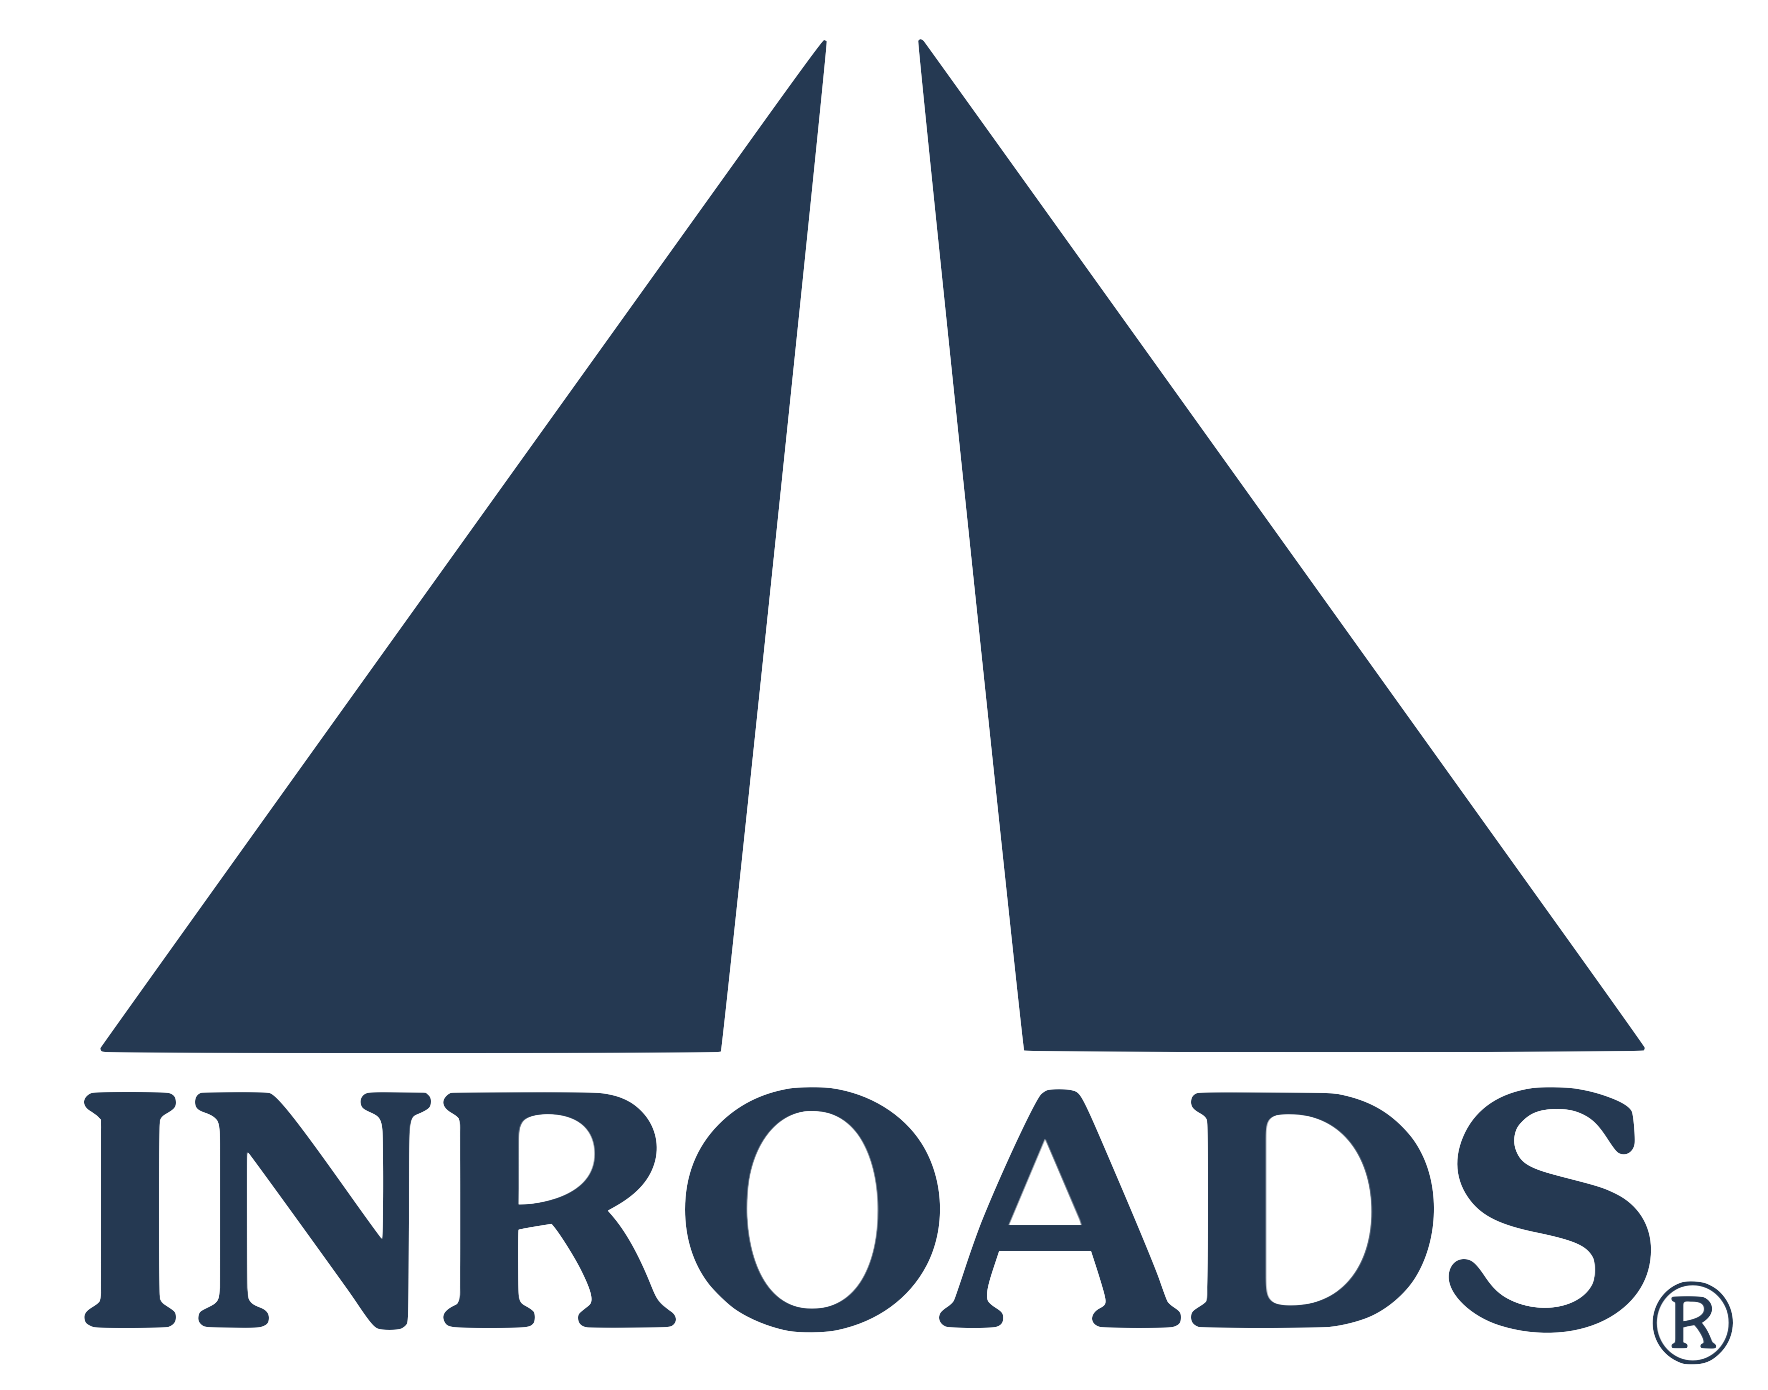 INROADS is excited t